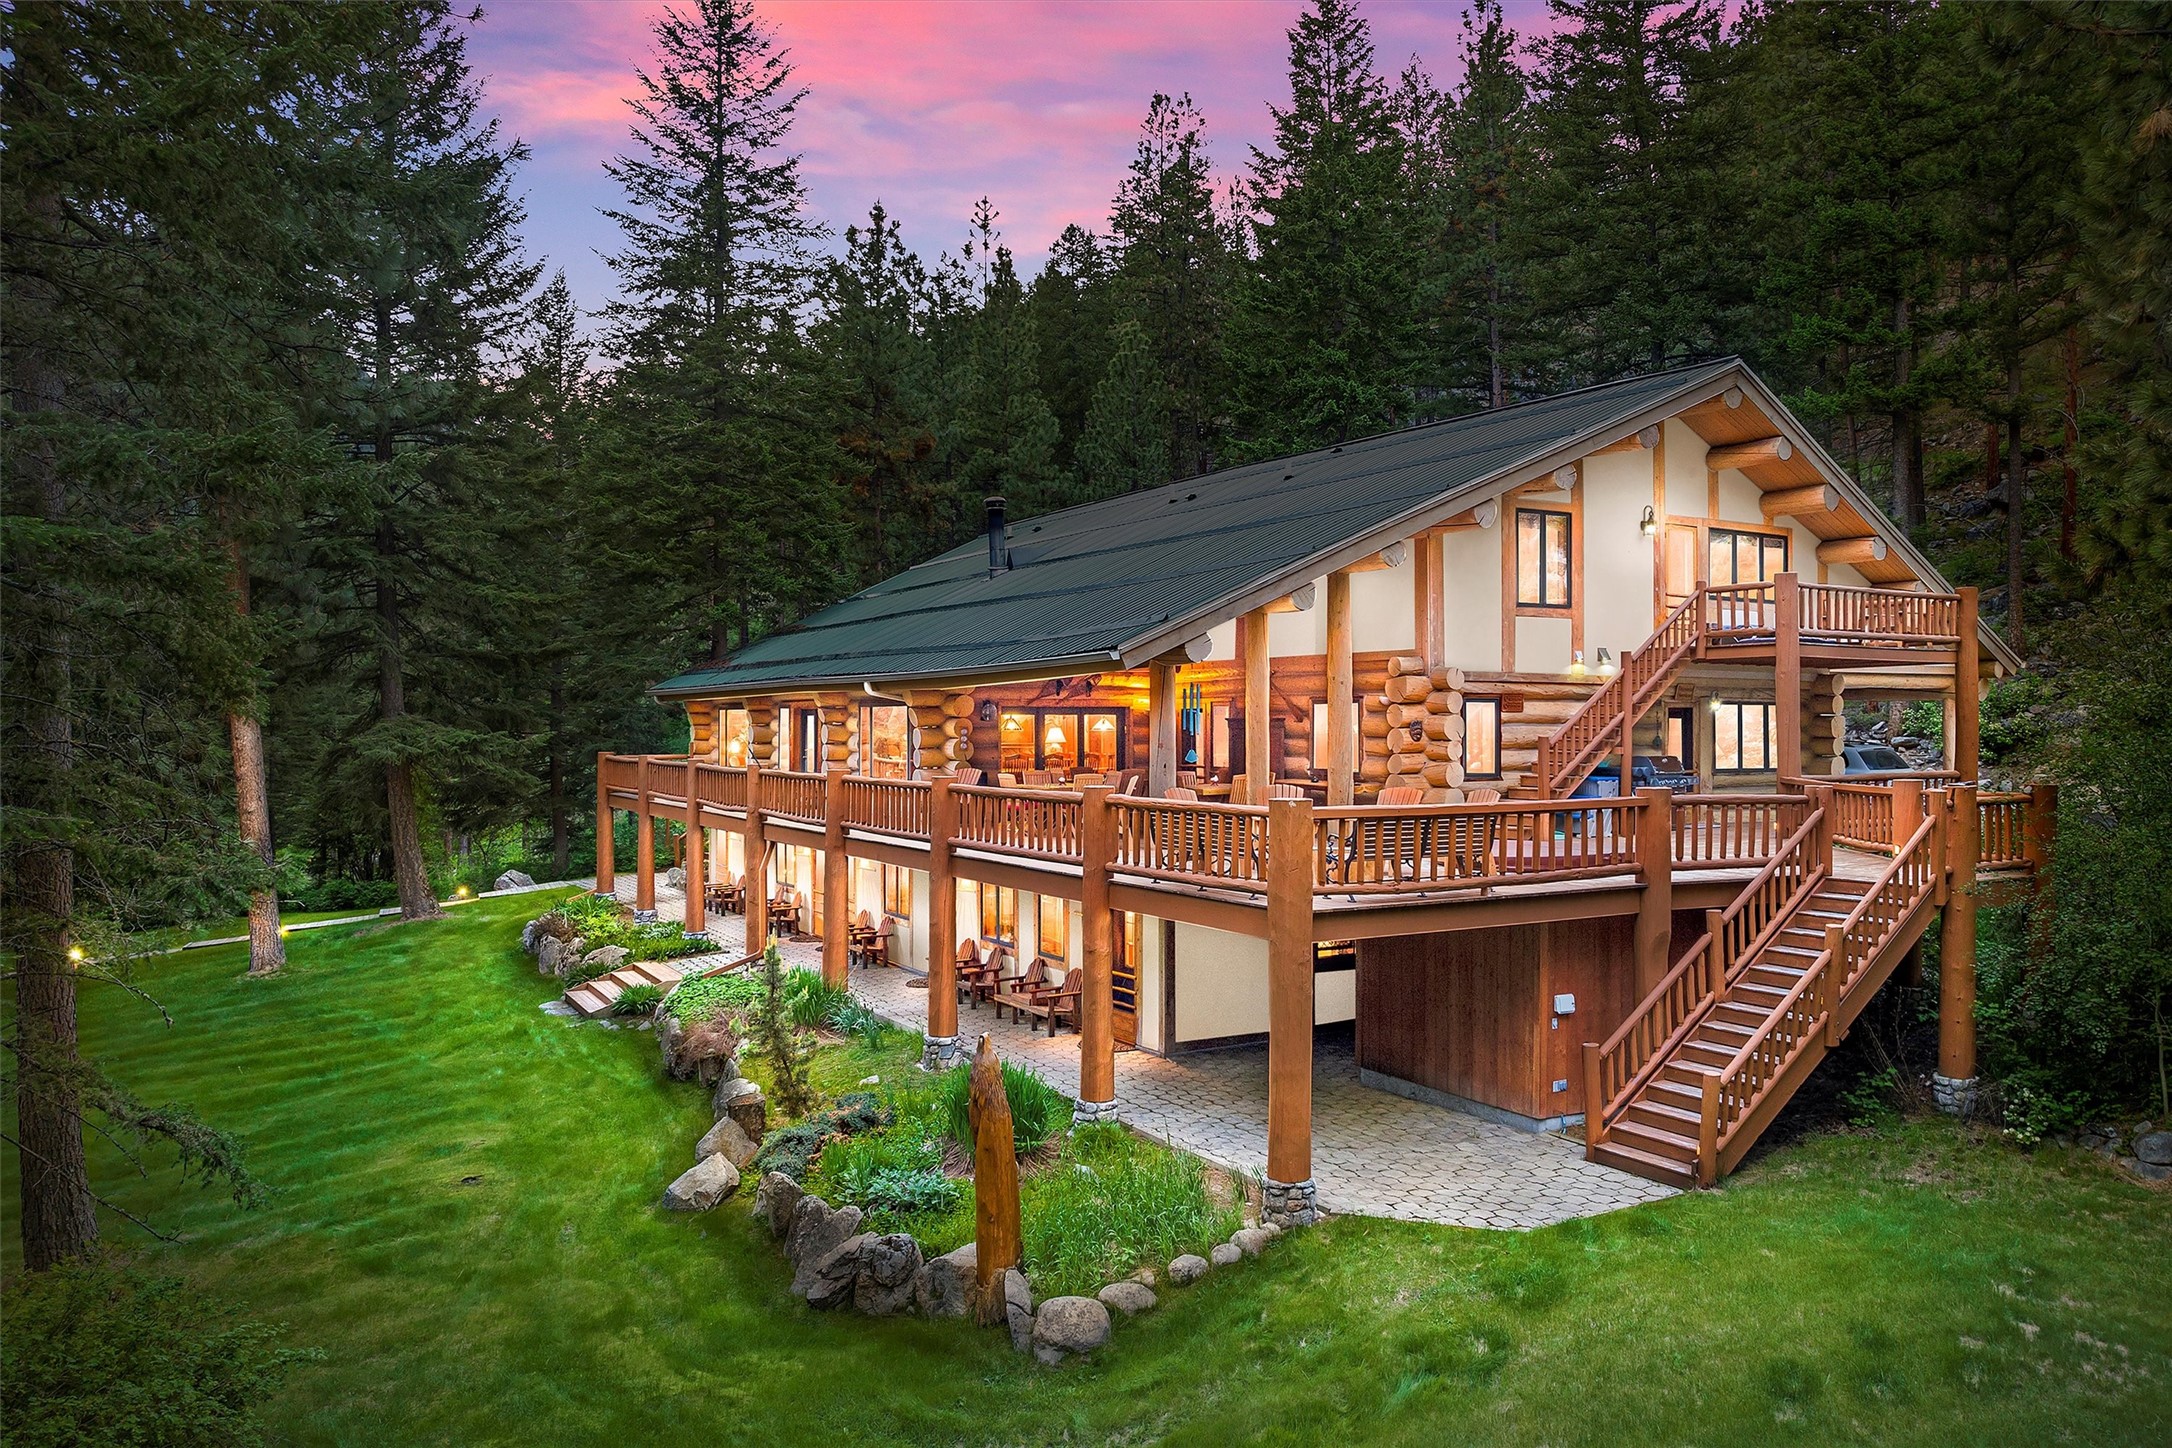 Situated at the mouth of Bear Creek Canyon is this secluded and magical destination known as Bear Creek Lodge.  Totaling 154.45 acres w/ year-round creek and shouldered by USFS on 2 sides, this unique property is truly a gem in our treasured state.  The classic 8,900 +- sf lodge is built with enormous logs from the Yellowstone NP vicinity.  A generous deck w/hot tub & covered area adds to the outdoor living space. Operating for 20 years as a desirable get-away for guests from around the world, the Lodge consists of 8 well-adorned guest rooms that capture the essence of nature.  Each ‘themed’ room features a private bathroom + outdoor exit. Melt your worries away by a crackling fire in the Great Room, retreat to the library, media/conference room or exercise room w/sauna. A 3-stall barn & 4-acre meadow are ideal for horses. Hike/ride into Forest Service and adjacent wilderness lands.  Go birding, fishing, or wildlife watching. Rejuvenate! Let your imagination soar at Bear Creek Lodge! Pick up where the owner left off to create a new retreat as a respite for visitors, or envision the possibilities for your own personal use.  All personal property is included.  Less than 1 hour driving time to the Missoula International airport!